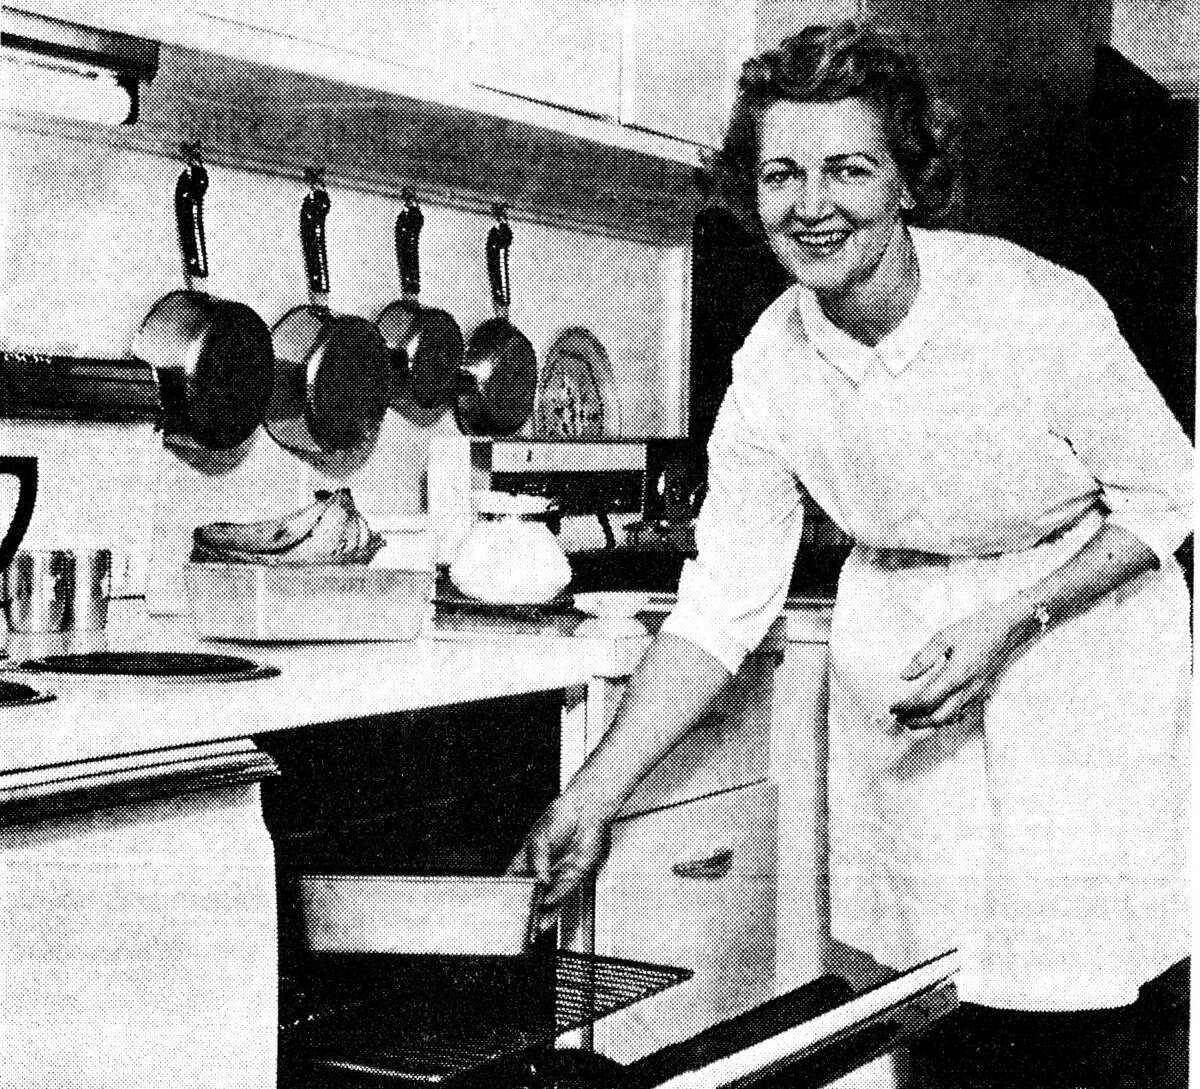 Mrs. Rupert Stephens, 500 Eighth St., puts in her ham loaf in the oven. The loaf is suitable for a hearty family dinner or when dressed up with a fancy salad and other trimmings makes an ideal buffer supper dish for company. Stephens was featured in the News Advocate's Cooking with Our Best column published on Jan. 31, 1963.